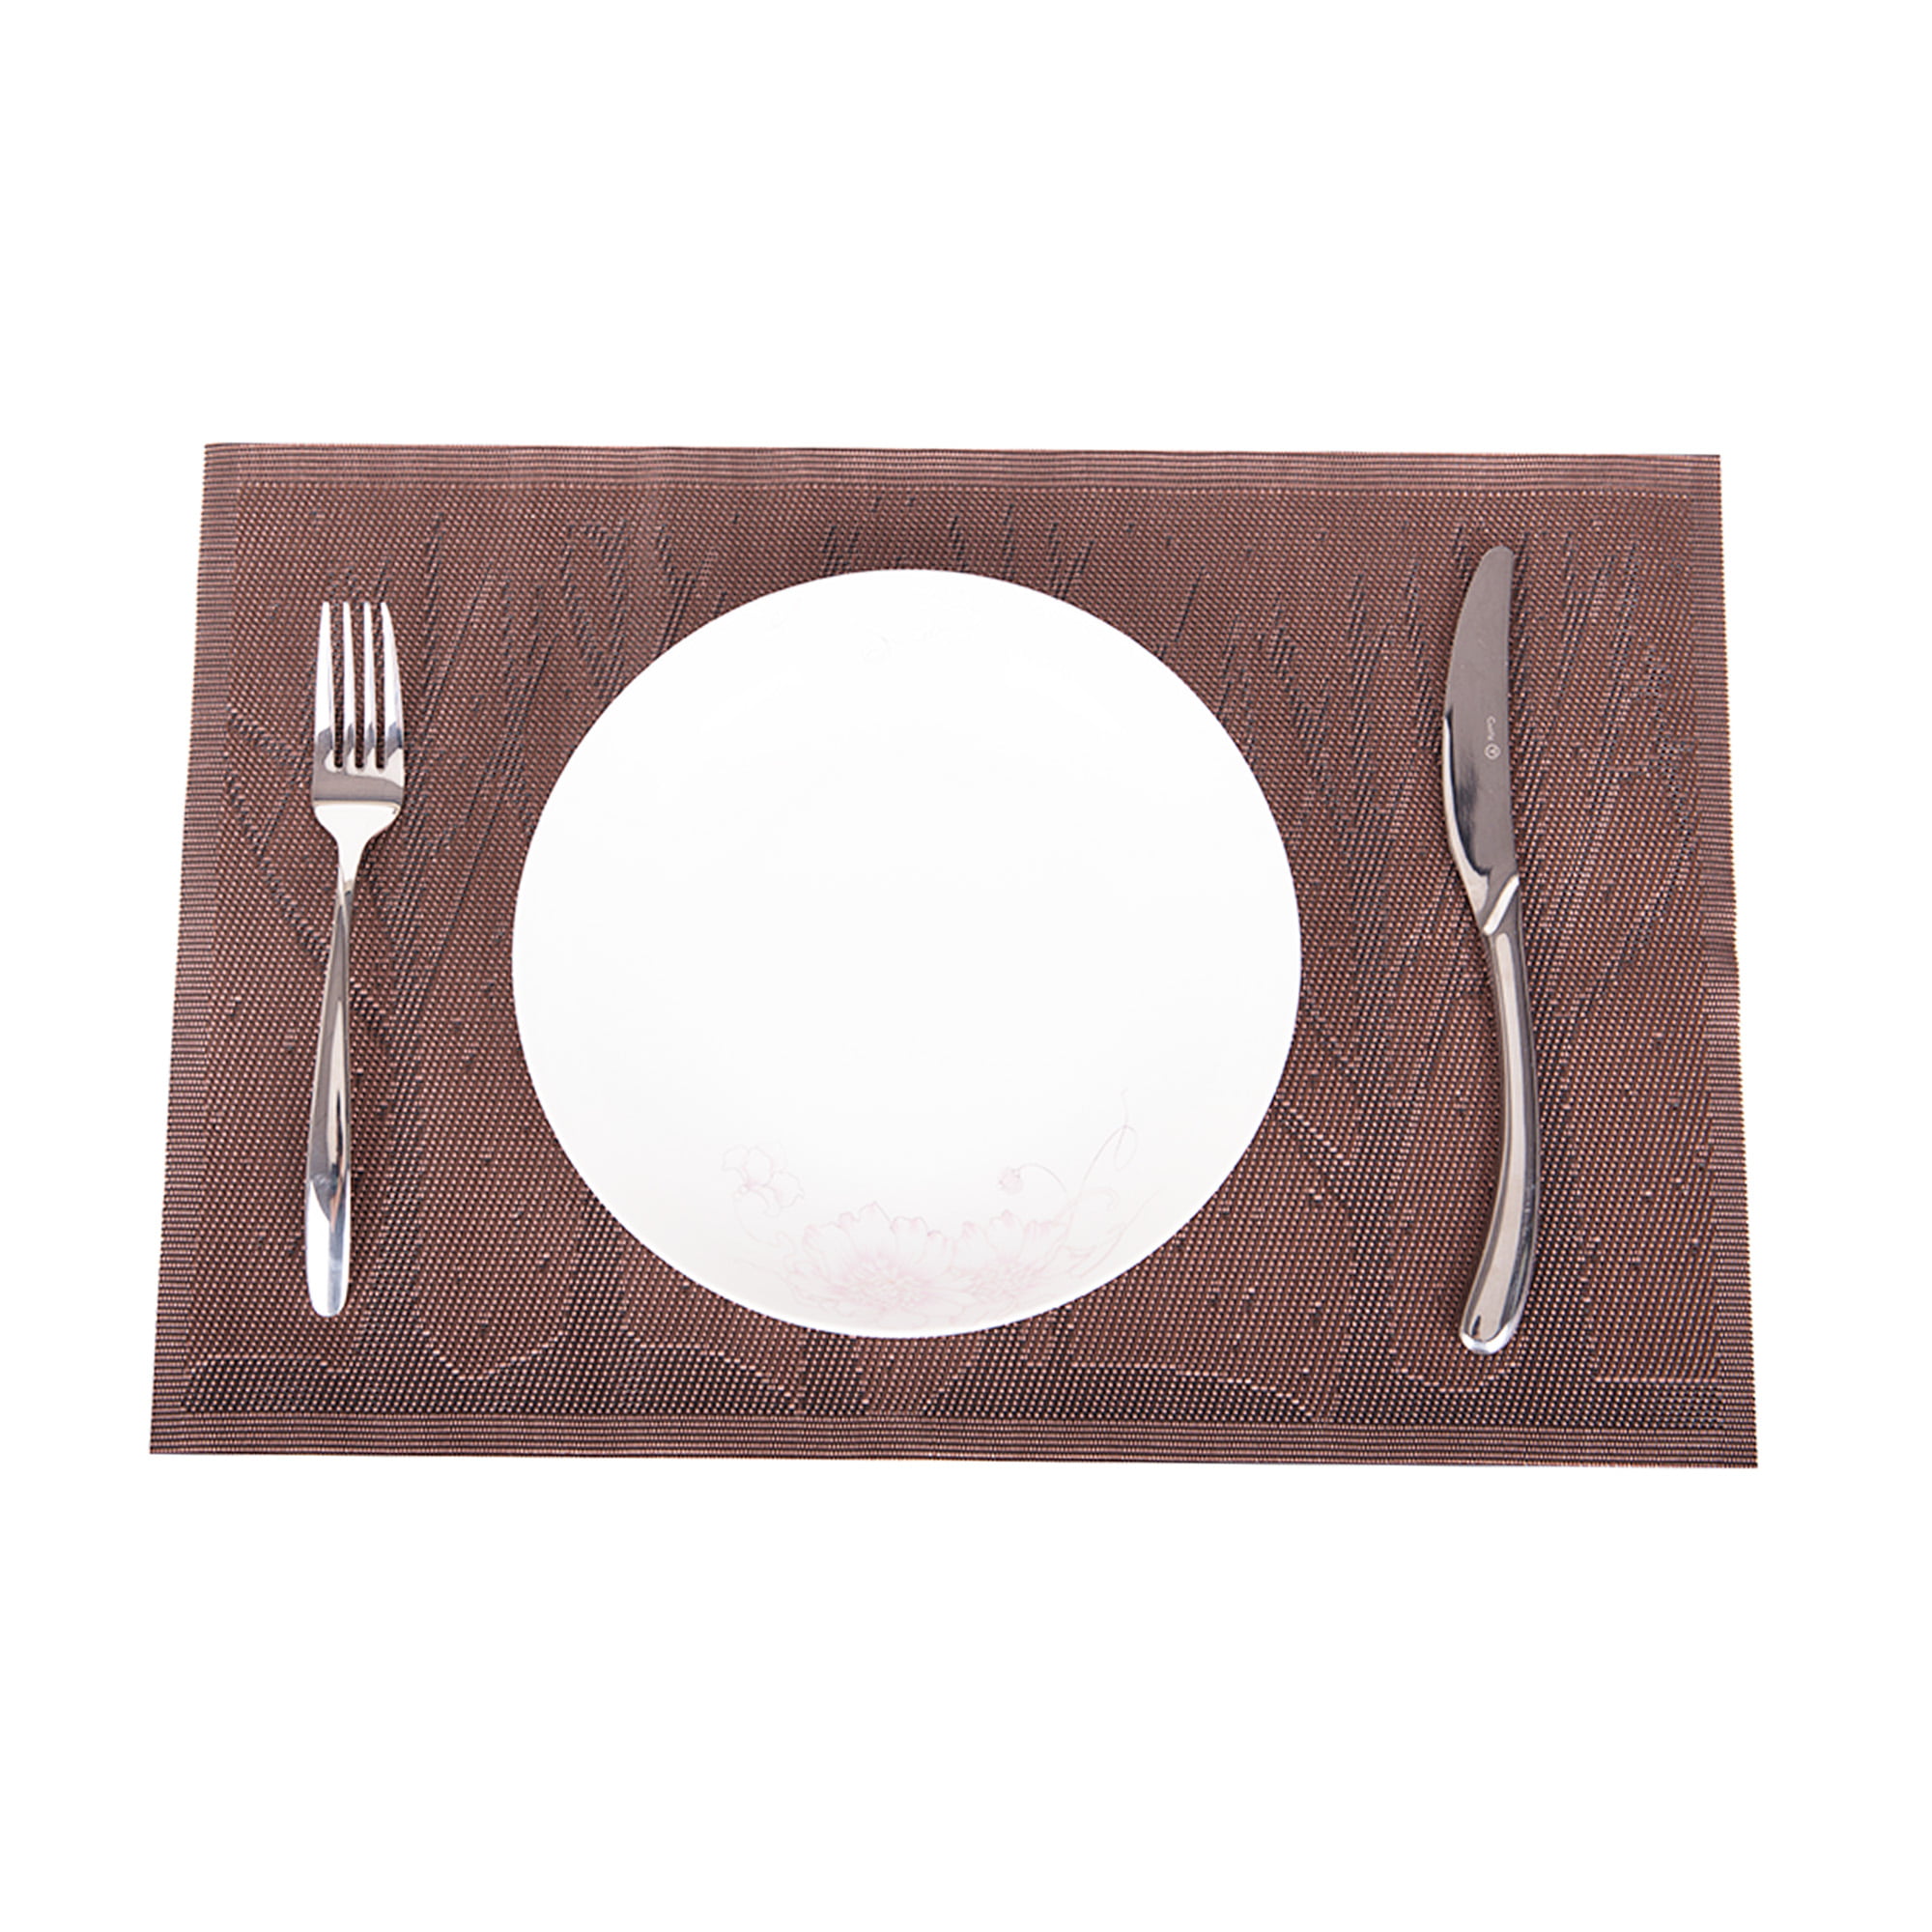 Table Mats Set of 6 Heat Resistant Washable Outdoor Wipeable Placemats for Kitchen Dining Table Decor Wood Table Protect Mats 17x12 inch MORROLS Waterproof Leather Placemats